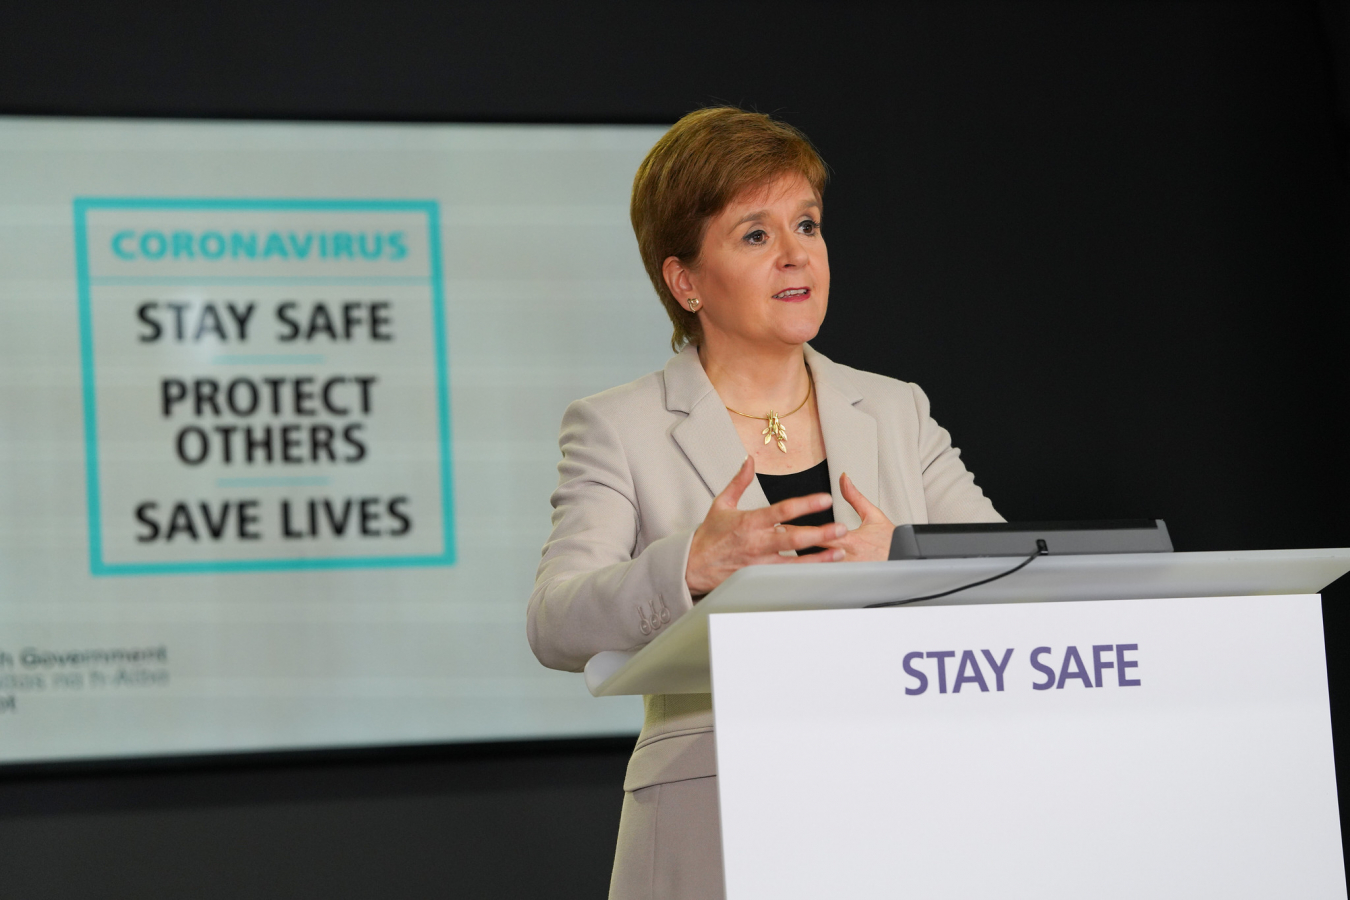 Nicola Sturgeon First Minister of Scotland COVID-19 press conference - 23 July 2020